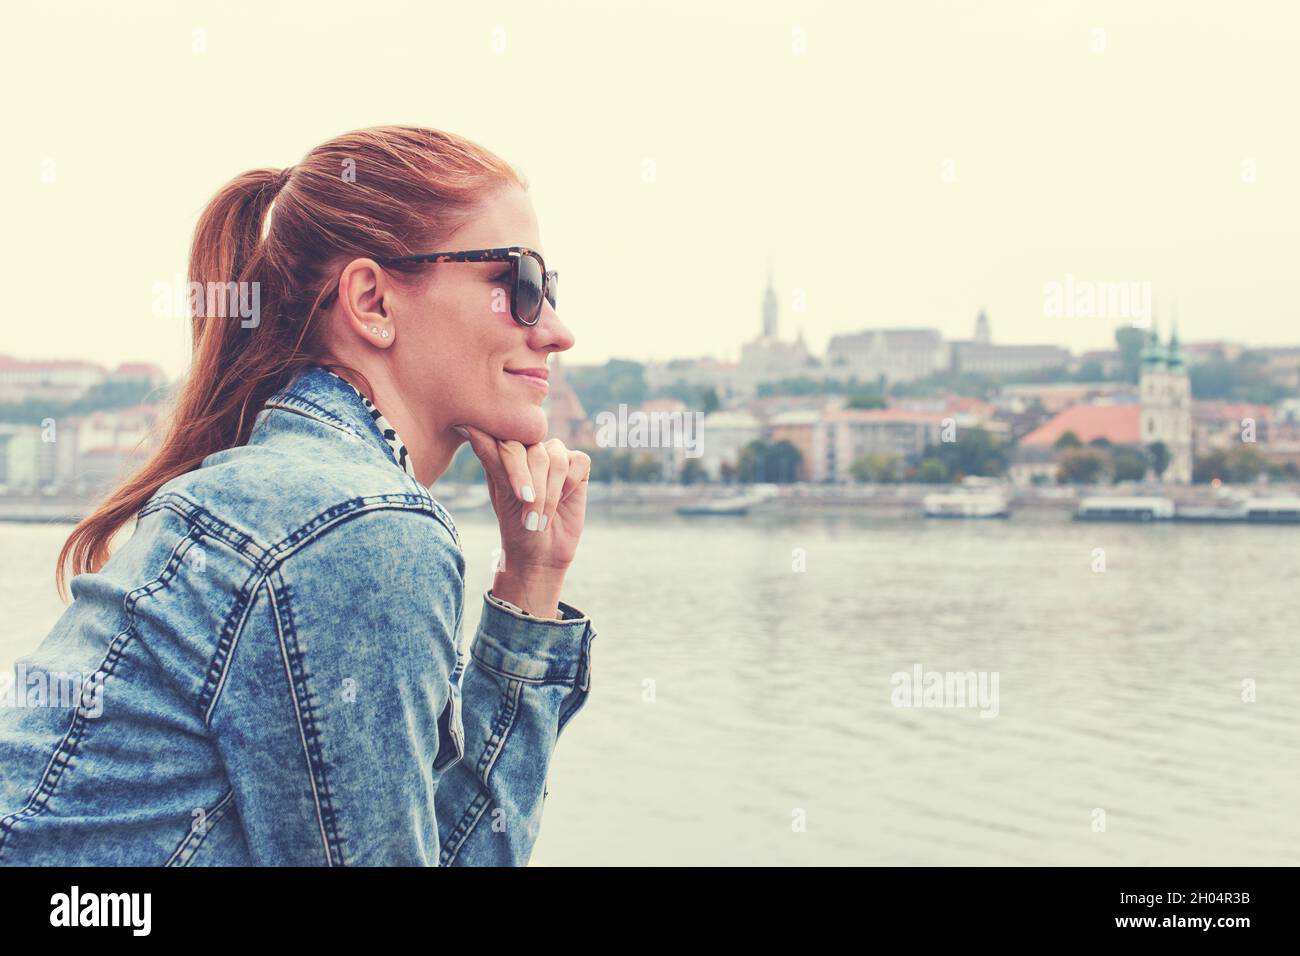 Young redhead Caucasian woman in denim jacket and sunglasses profile view at city panorama Stock Photo